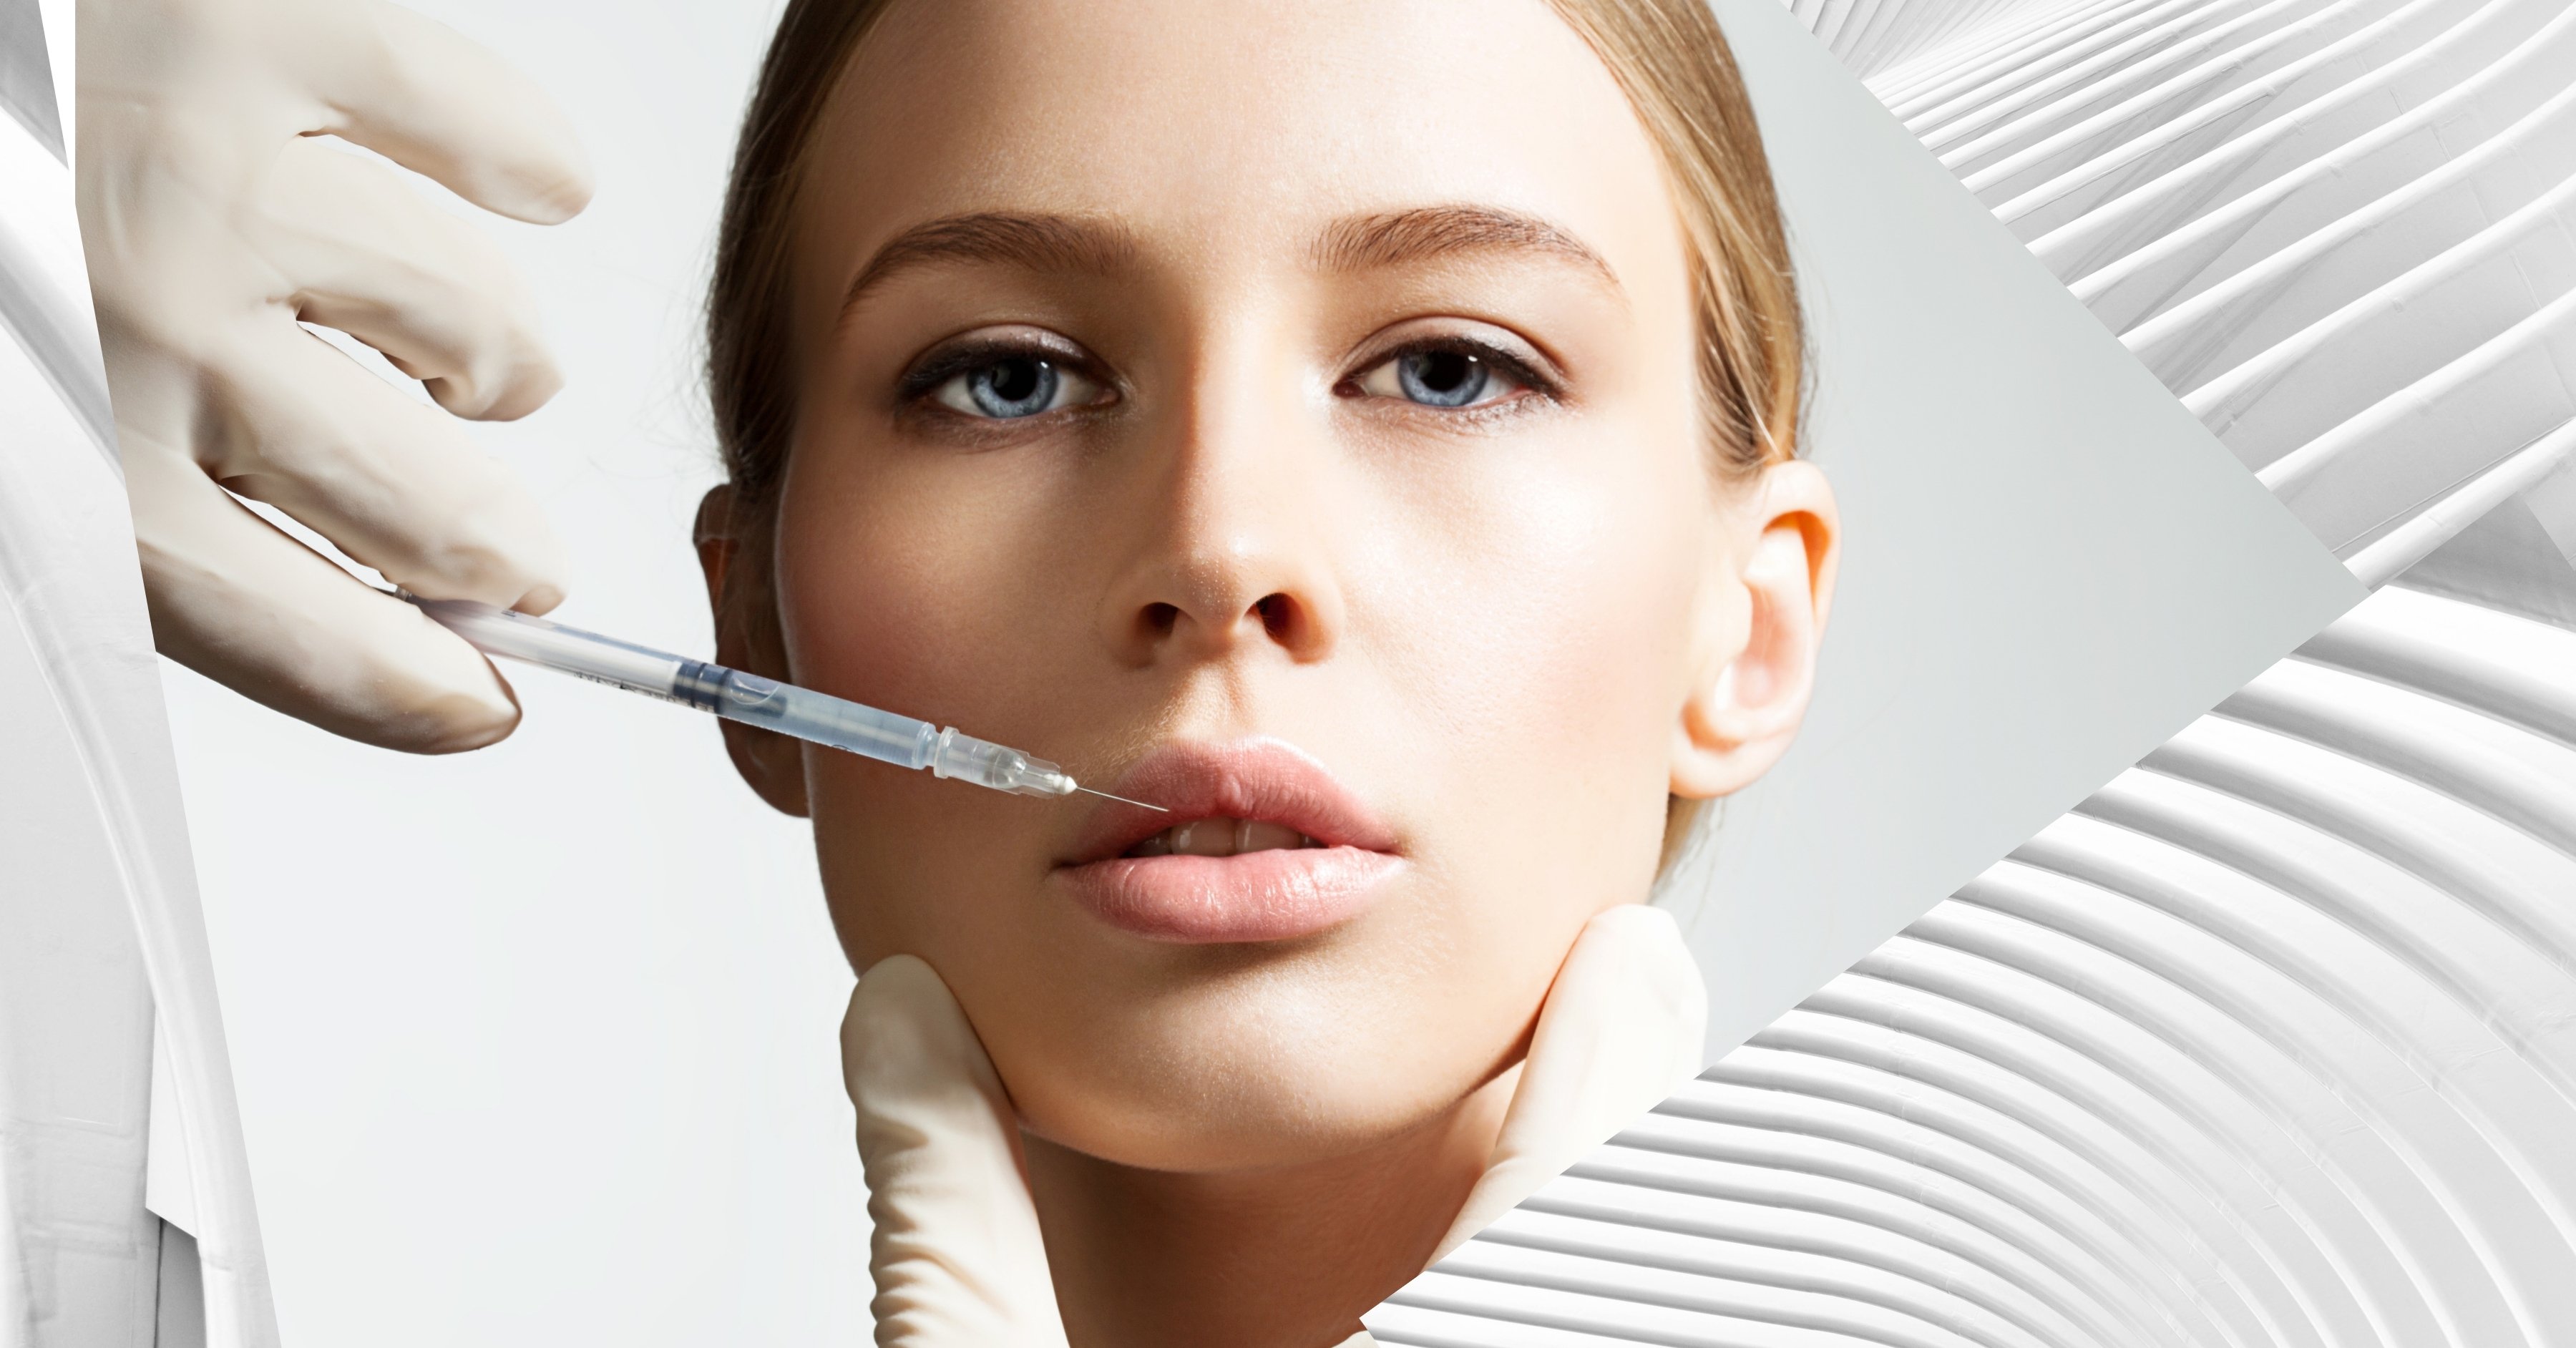 5 Alternatives to Botox that Give Similar Results